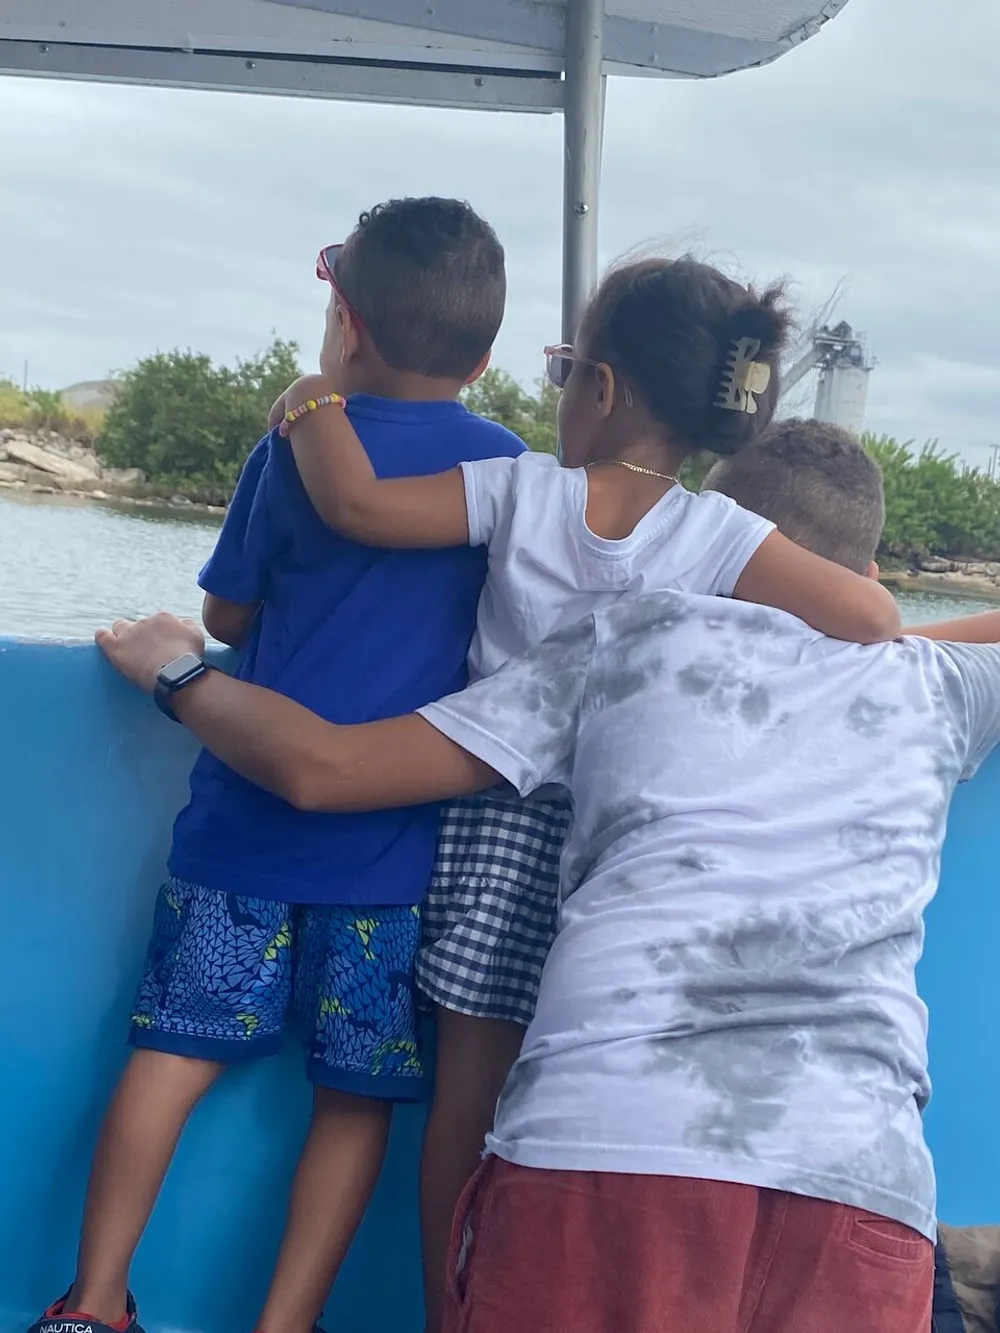 Three children are affectionately hugging each other while looking out at a view from a boat